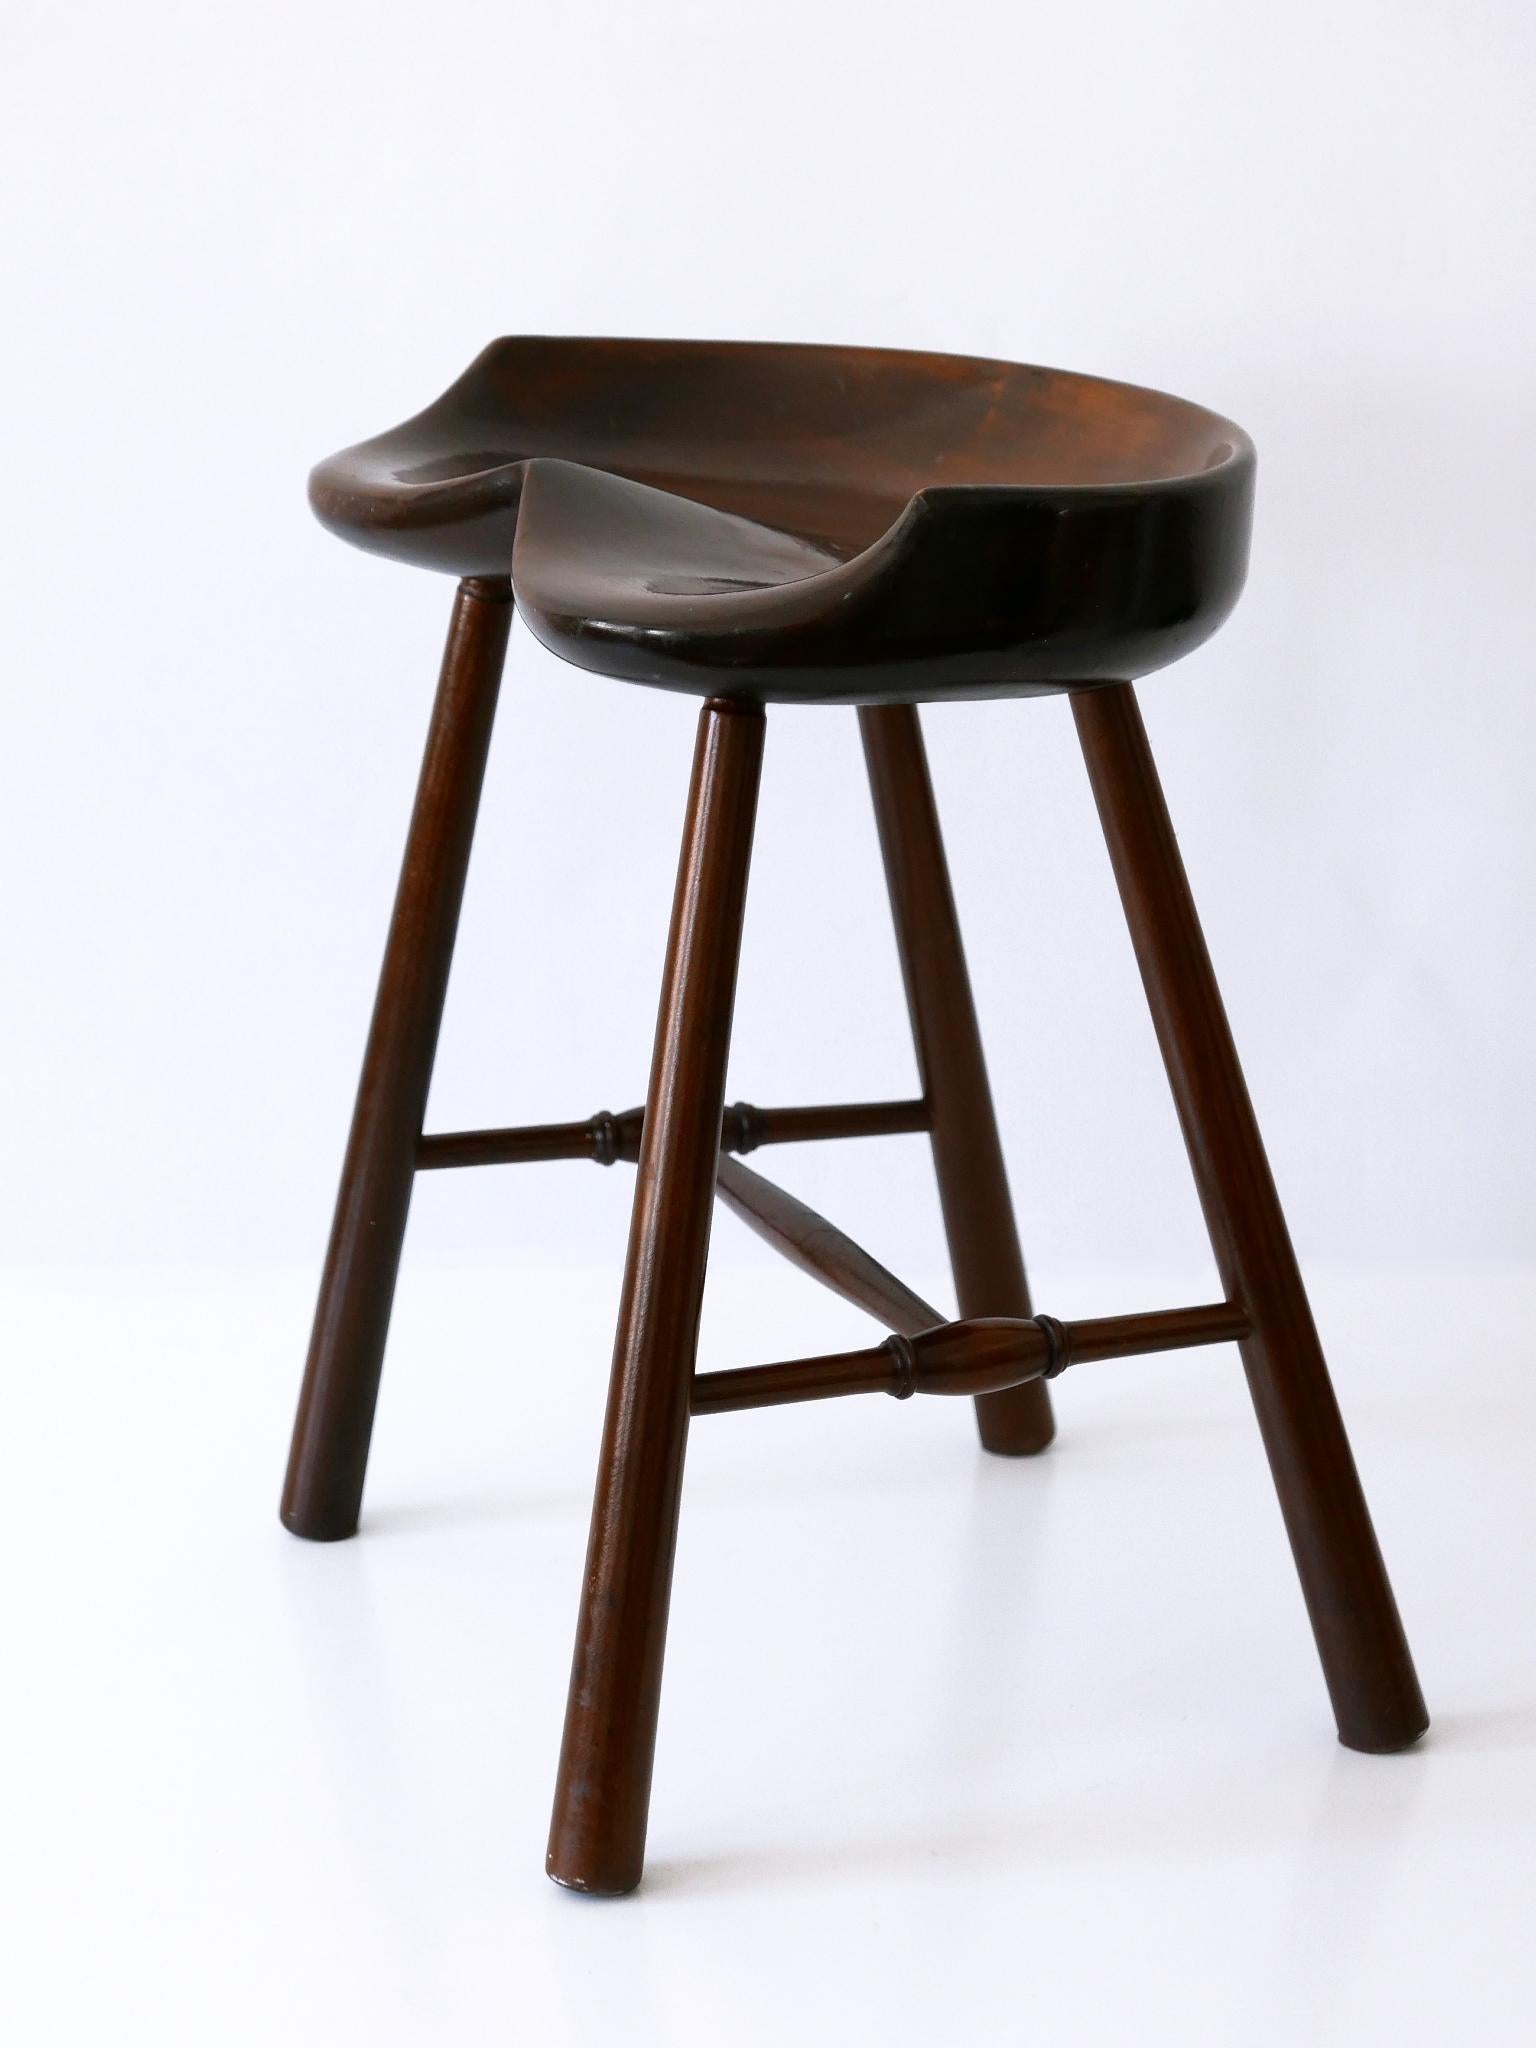 Extremely rare, beautiful and highly decorative Mid-Century Modern stool. Manufactured in Germany, 1950s.

Executed in solid wood.

Condition:
Good original vintage condition. Wear consistent with use and age.